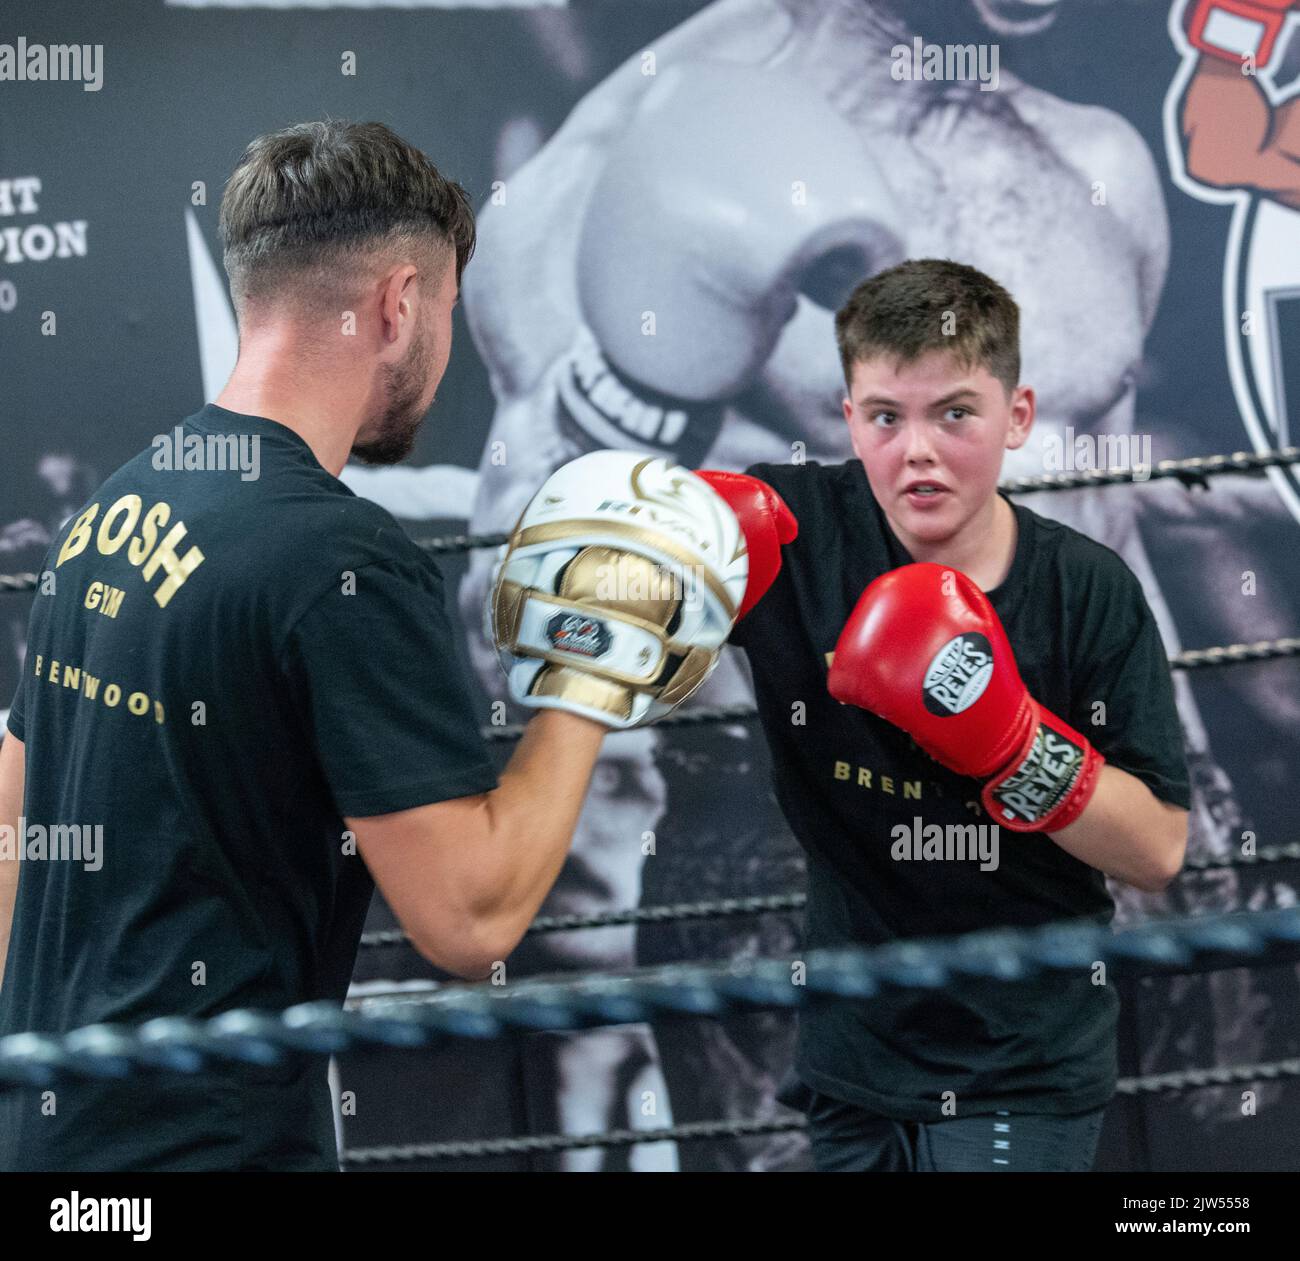 Brentwood Essex 3rd September 2022 Thomas  Skinner (The Apprentice and Celebrity Master Chief) opens his latest business venture, the Bosh Gym in Brentwood Essex UK. A boy sparing and boxing with boxing gloves  Credit: Ian Davidson/Alamy Live News Stock Photo